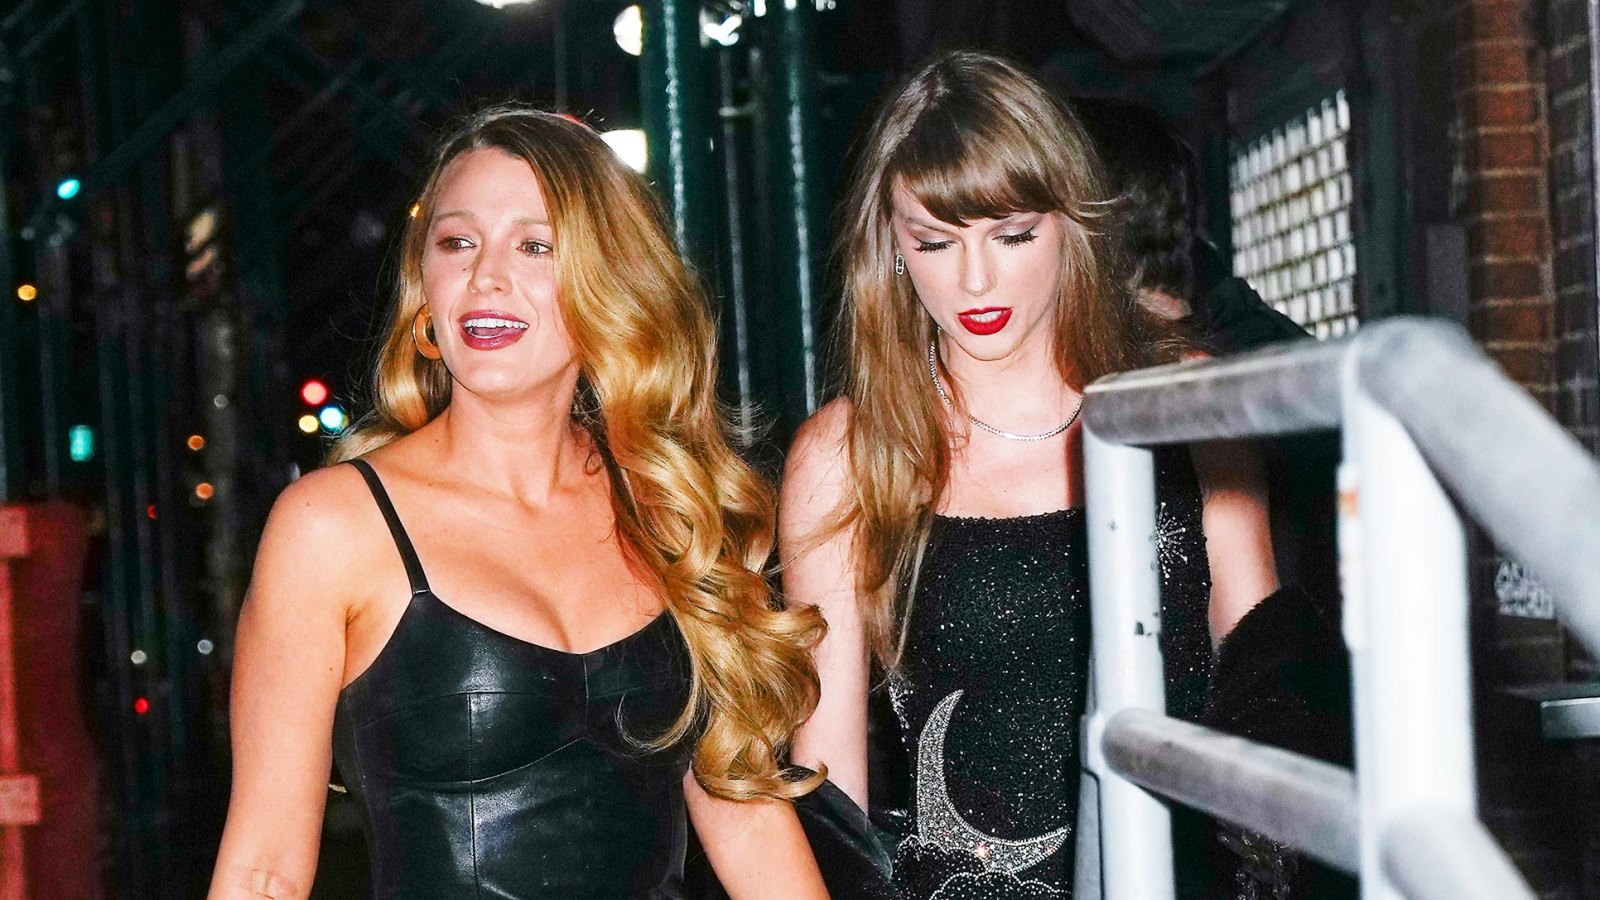 Blake Lively Says BFF Taylor Swift Is Even Better In Real Life While Sharing Joyful Party Photos